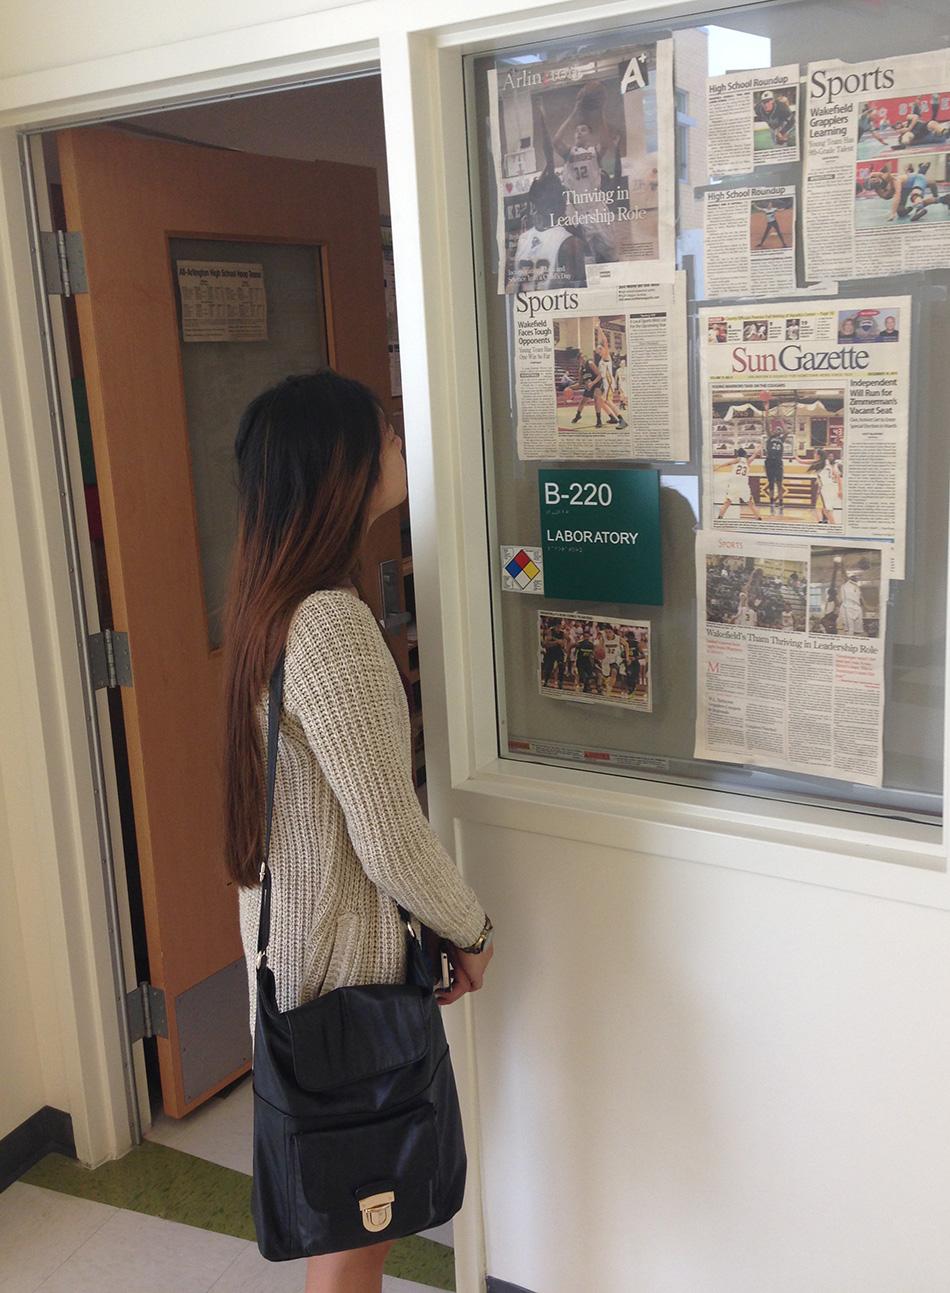 Senior Cathleen Madlansacay reads the sports clippings that Mr. Harris has posted outside his room.